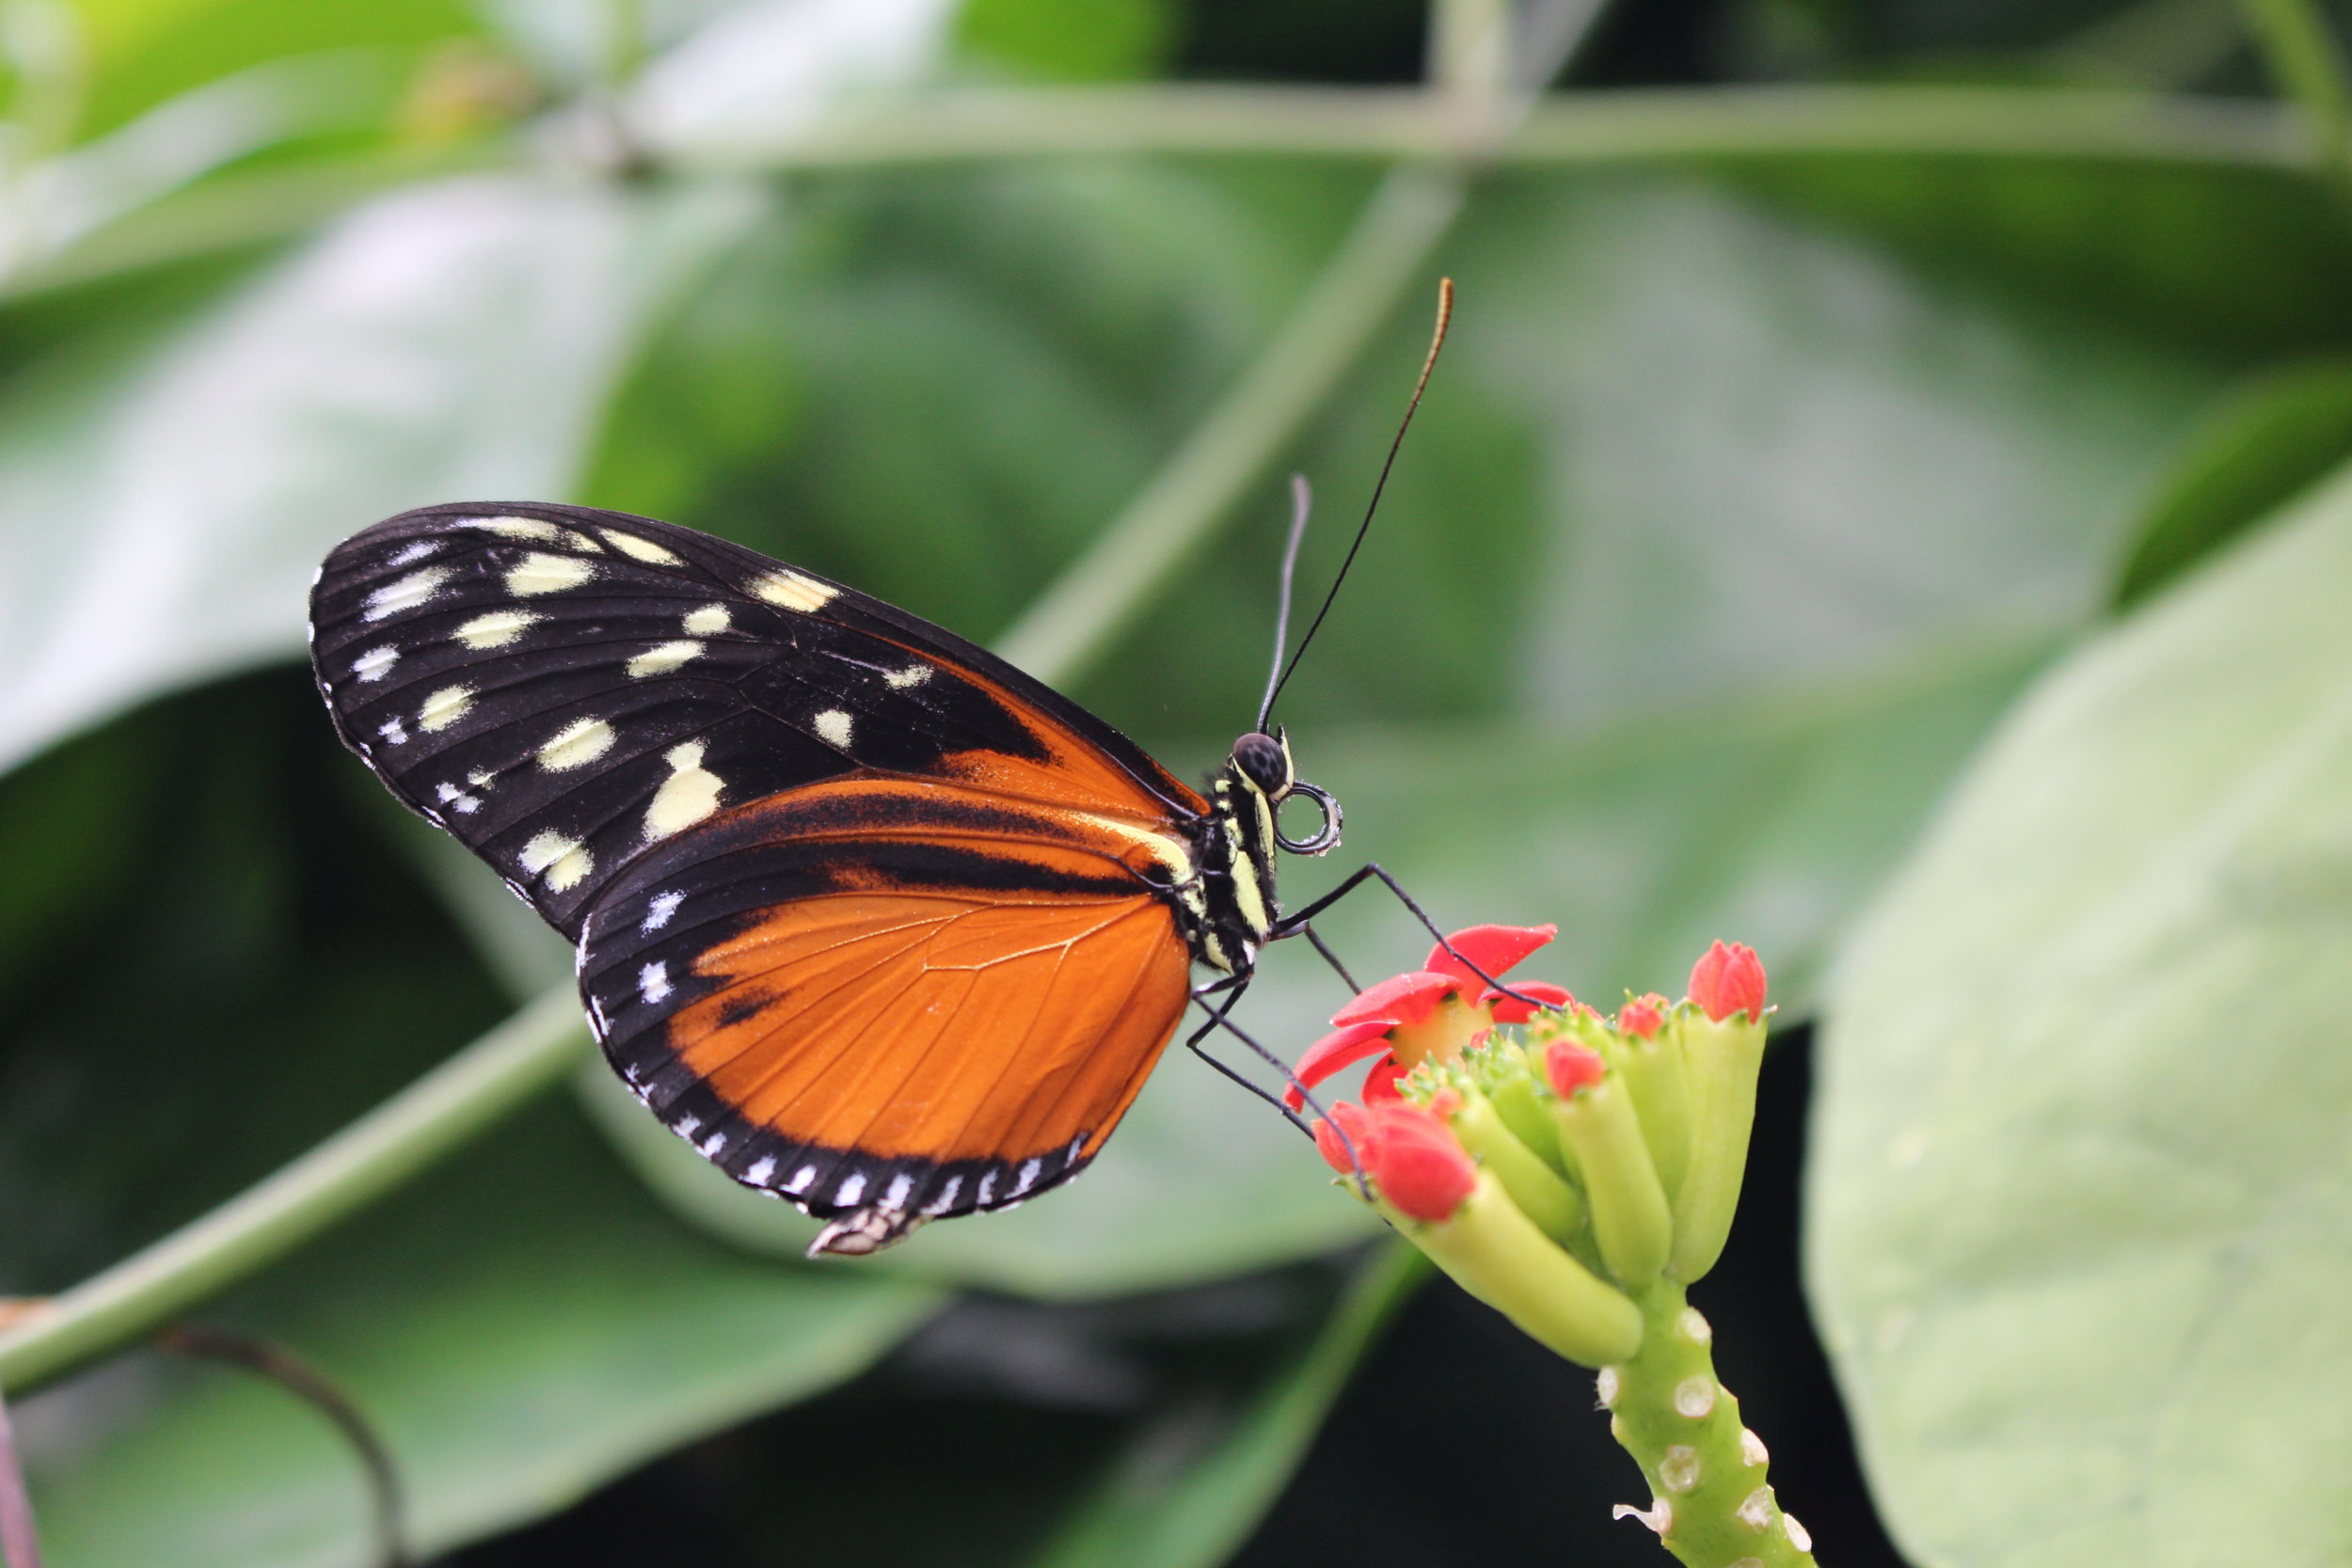 Close-up of a butterfly in the Butterfly House